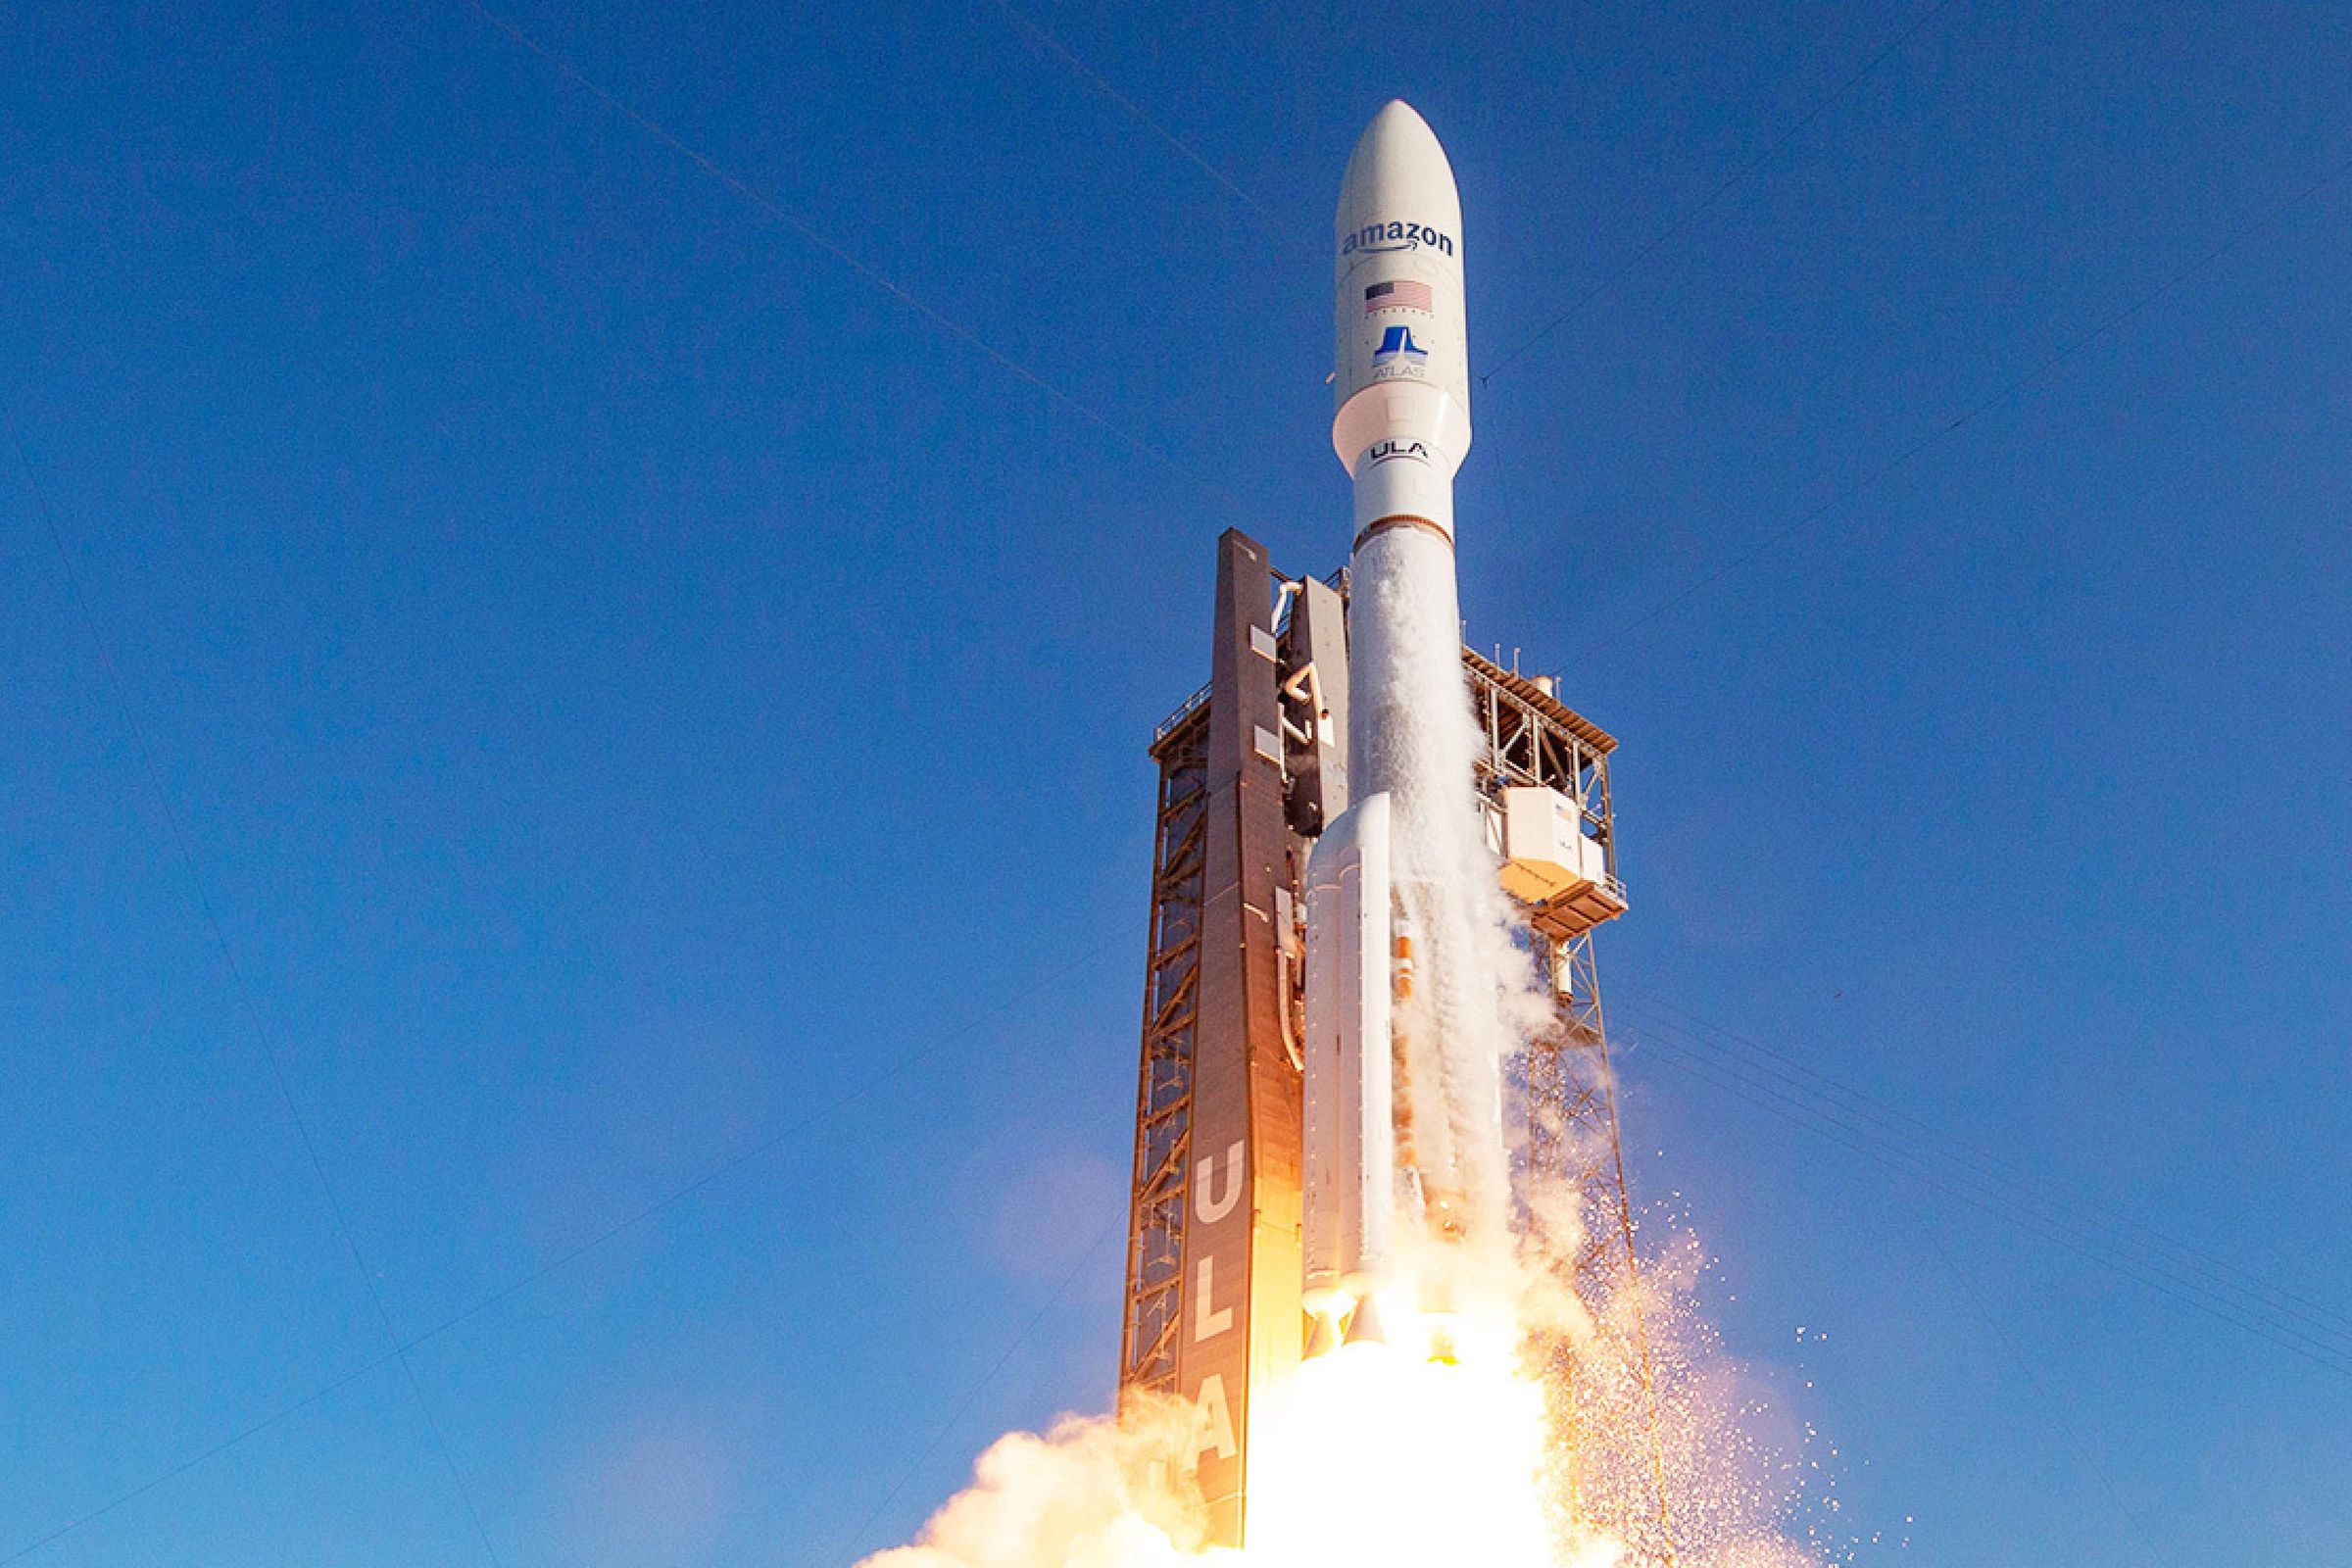 A photo showing Project Kuiper satellites being launched into space